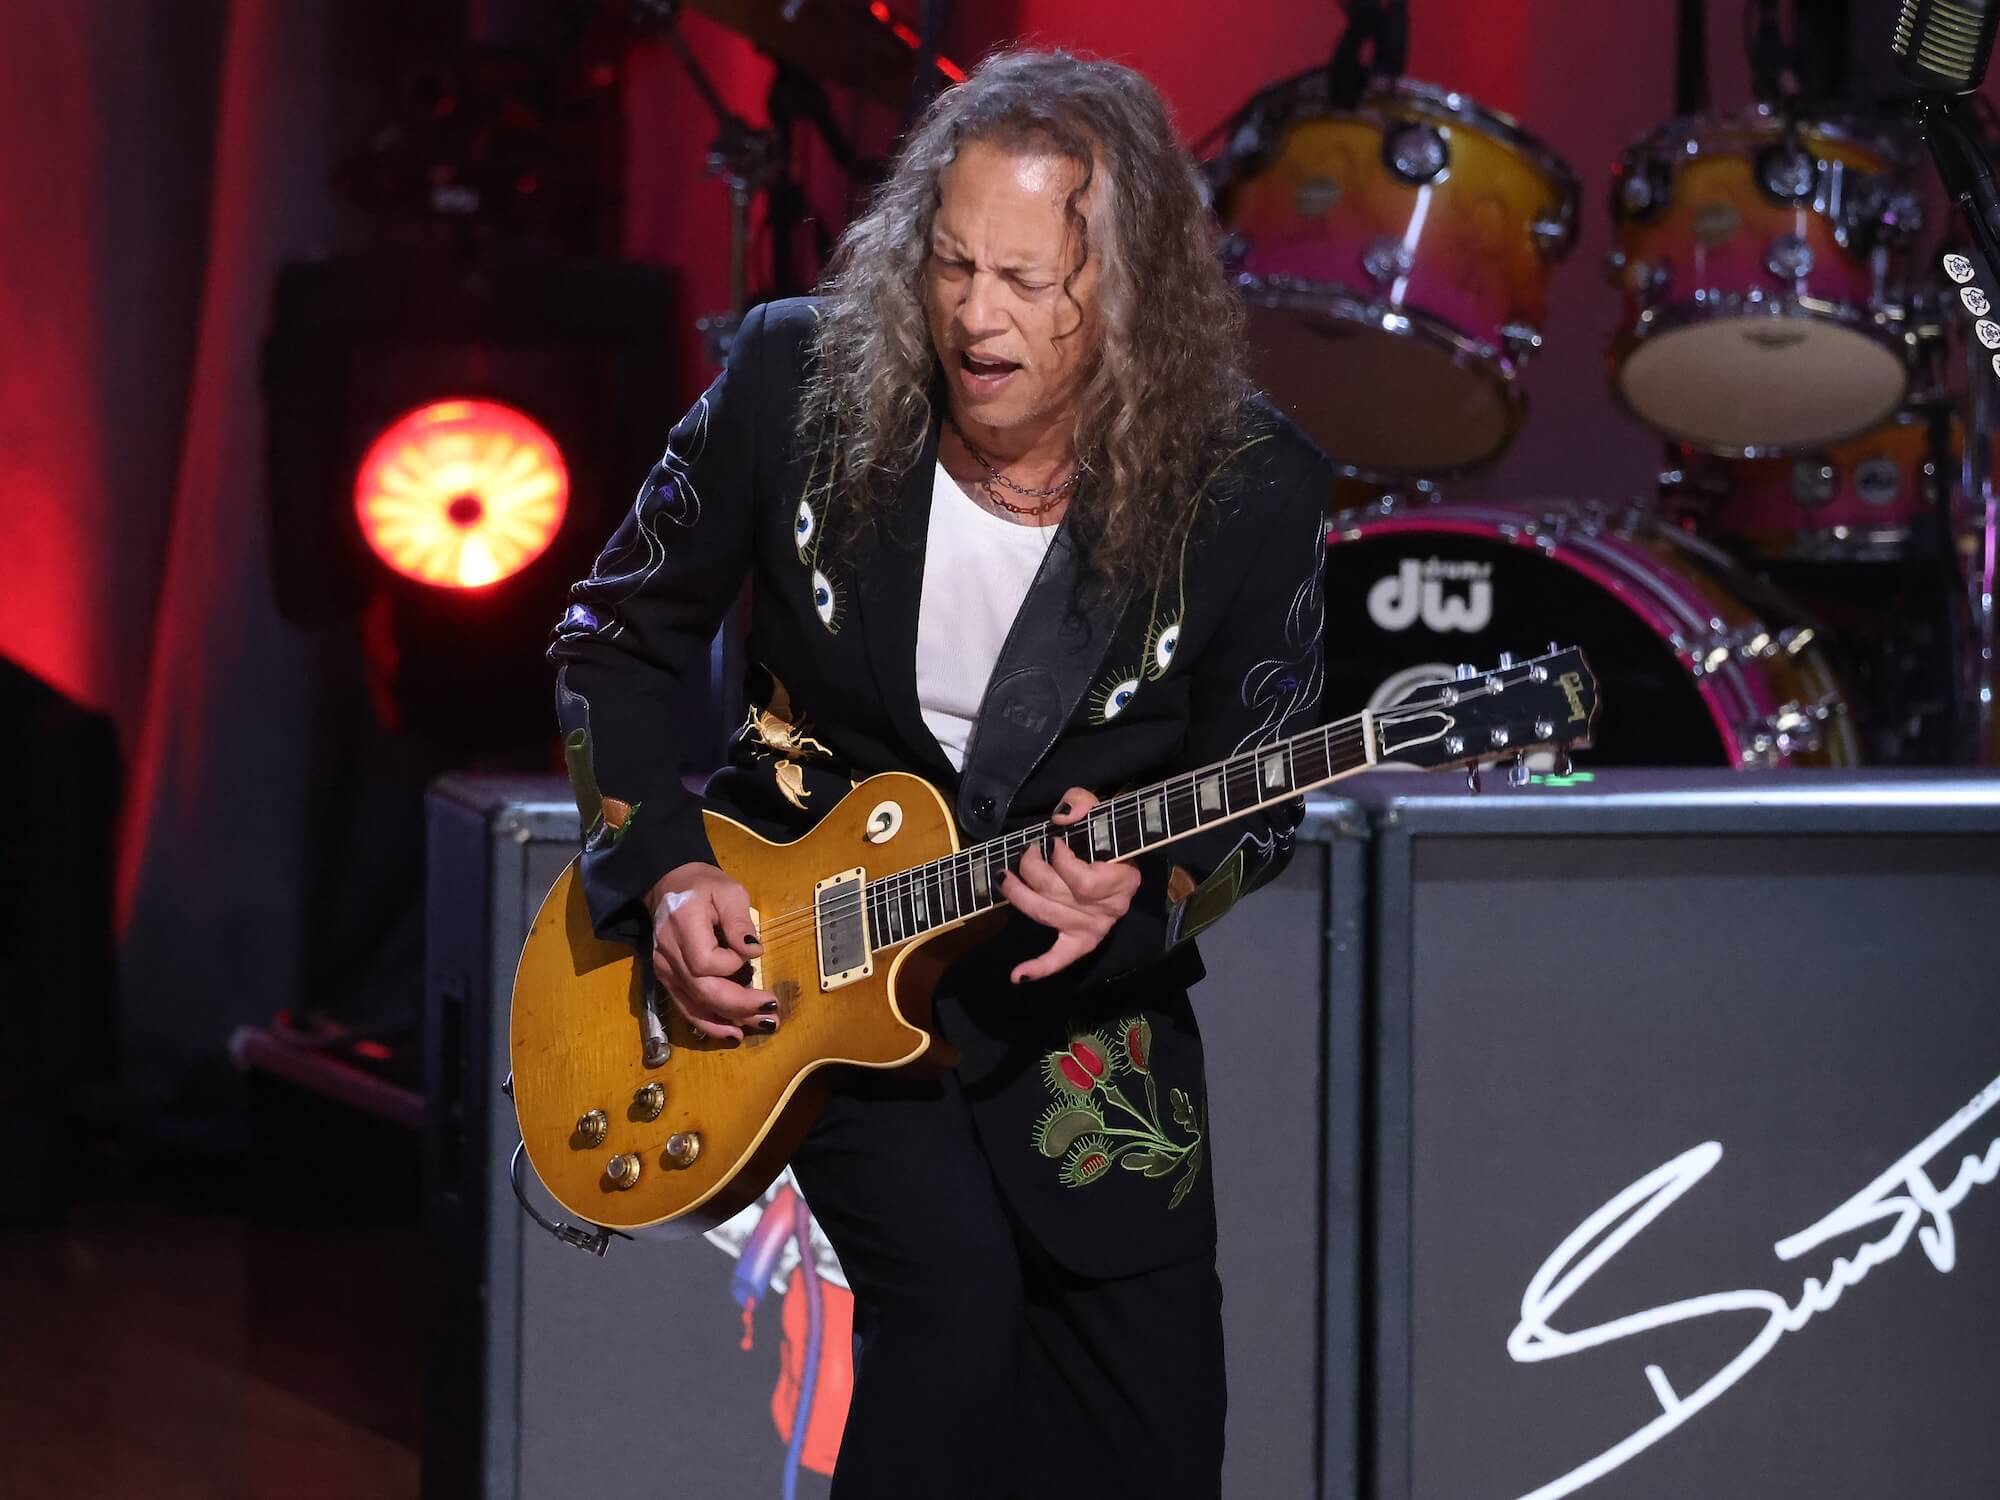 Hammett playing his ‘Greeny’ Les Paul, photo by Taylor Hill/WireImage via Getty Images